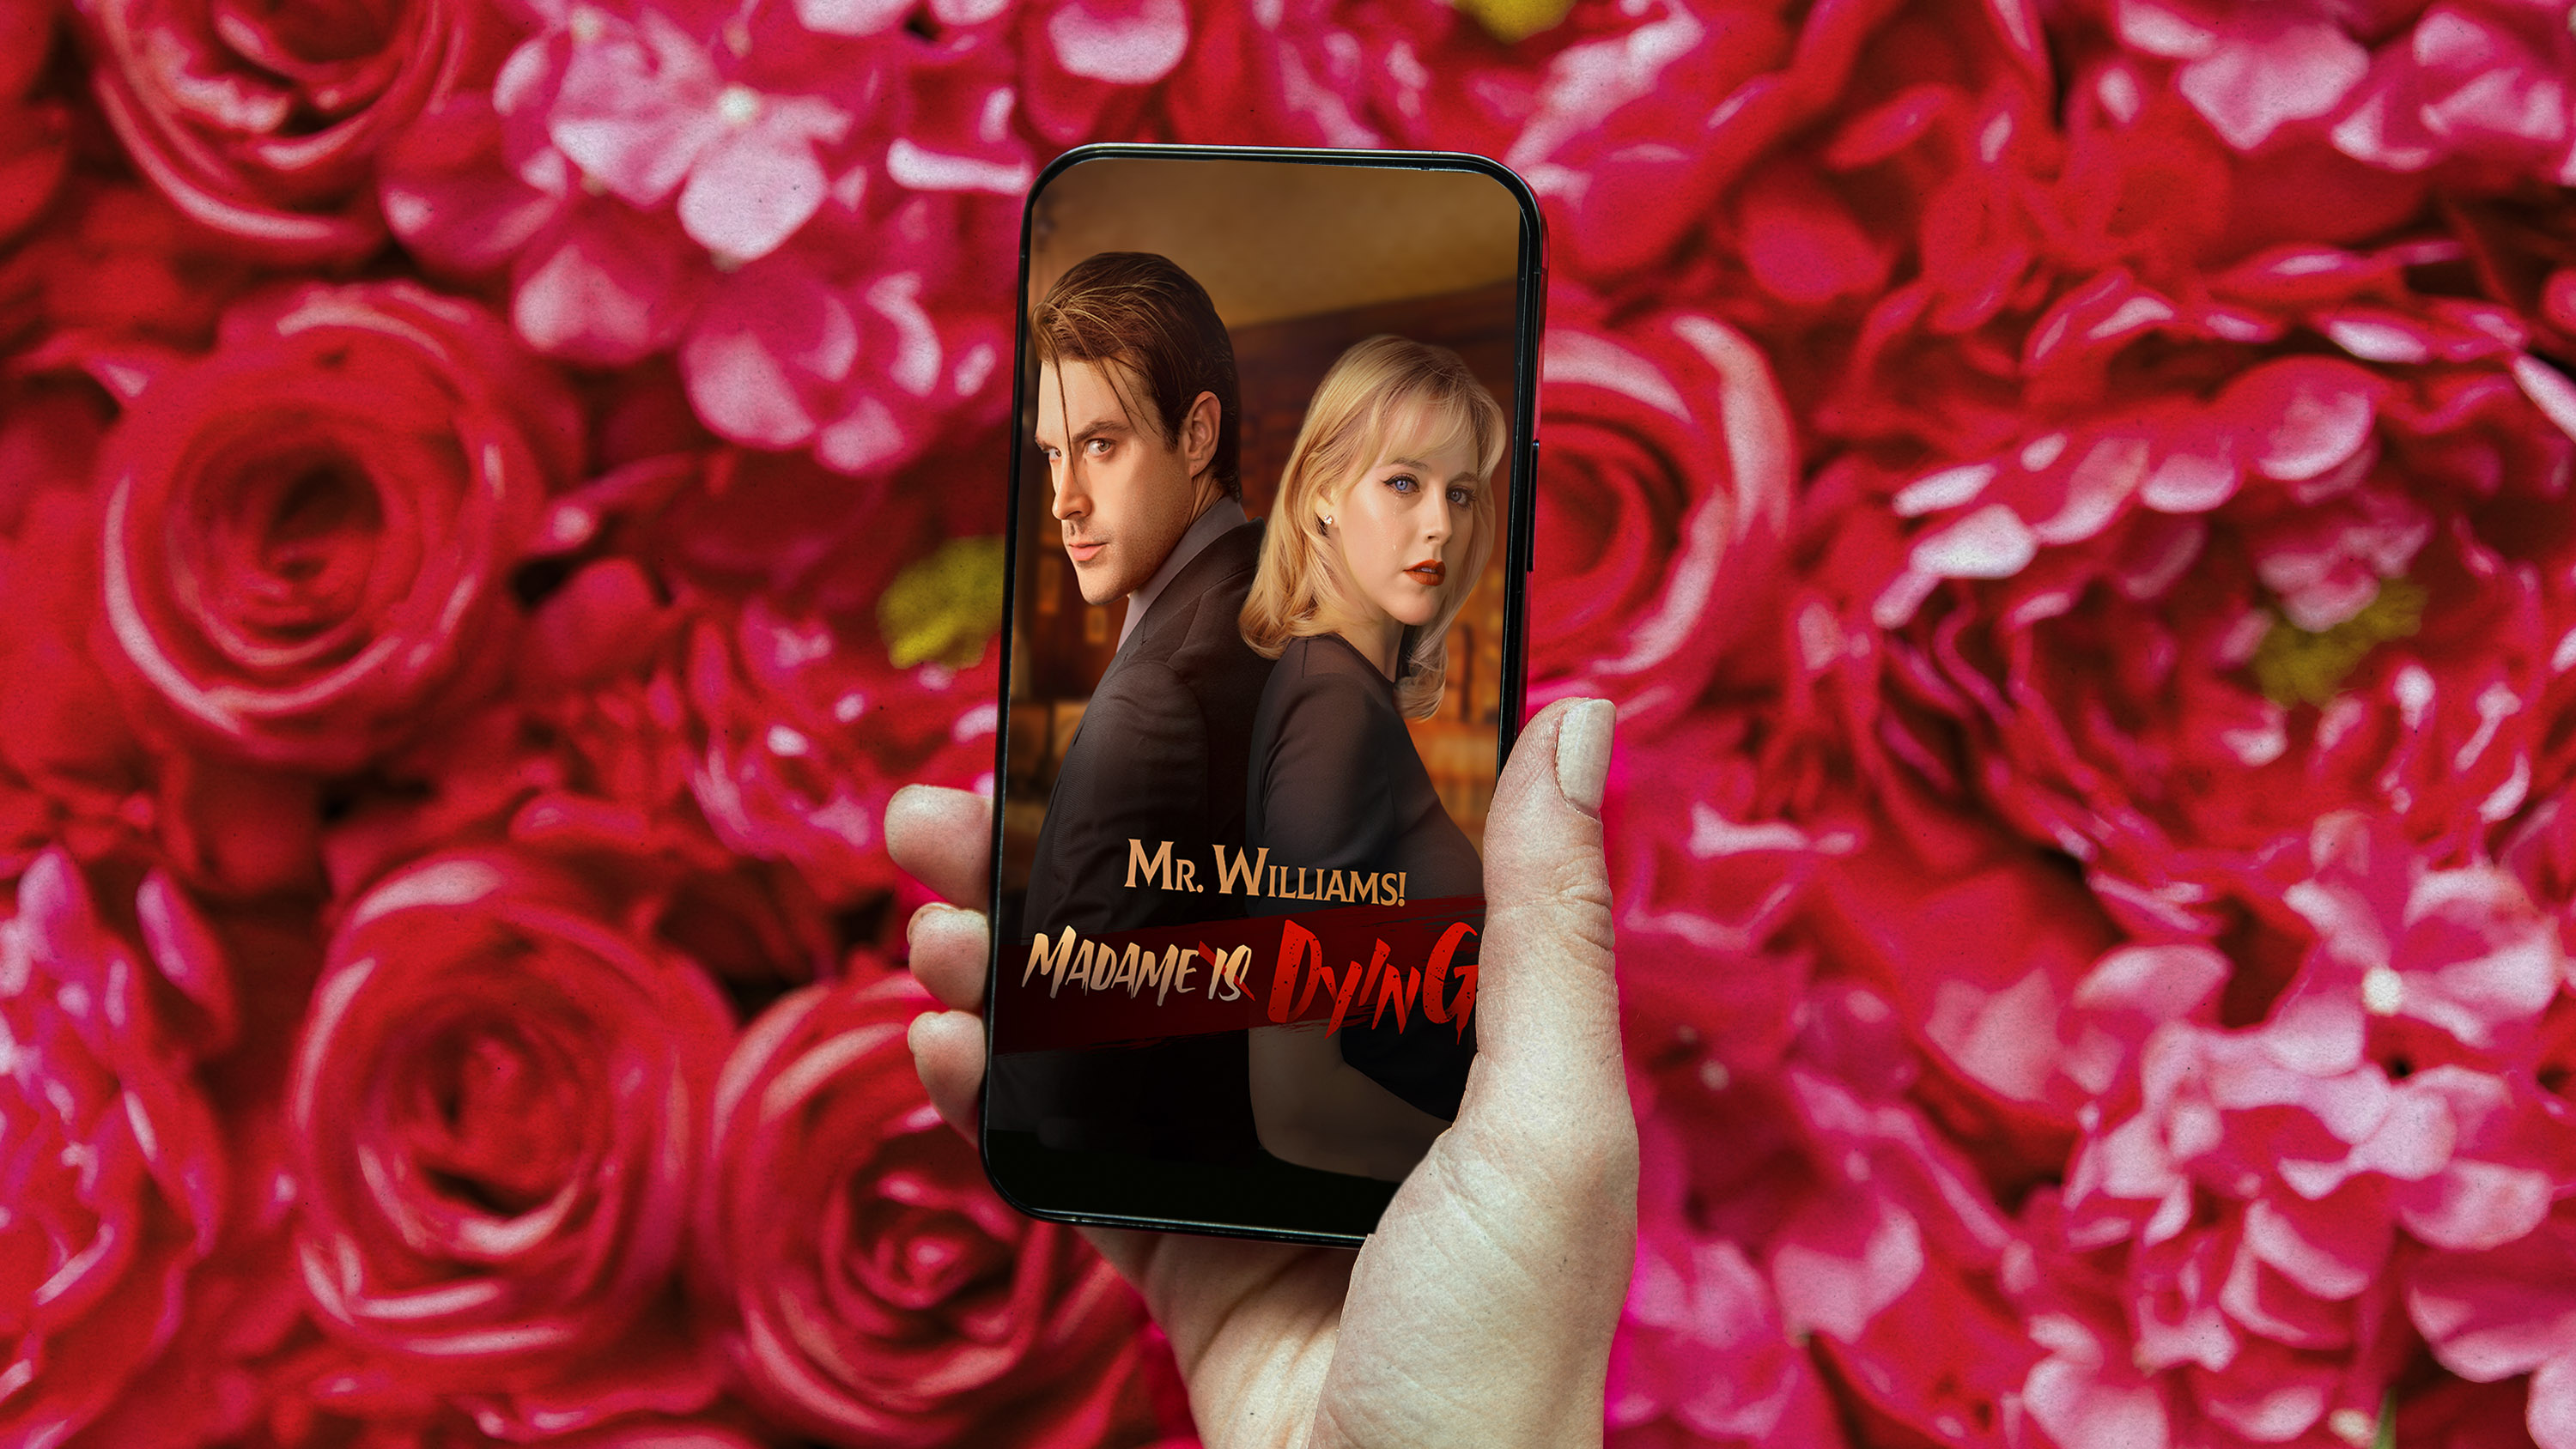 in front of a bed of roses, a hand holds a cell phone with the promo image for the online soap opera, &quot;Mr Williams! Madame is Dying&quot;